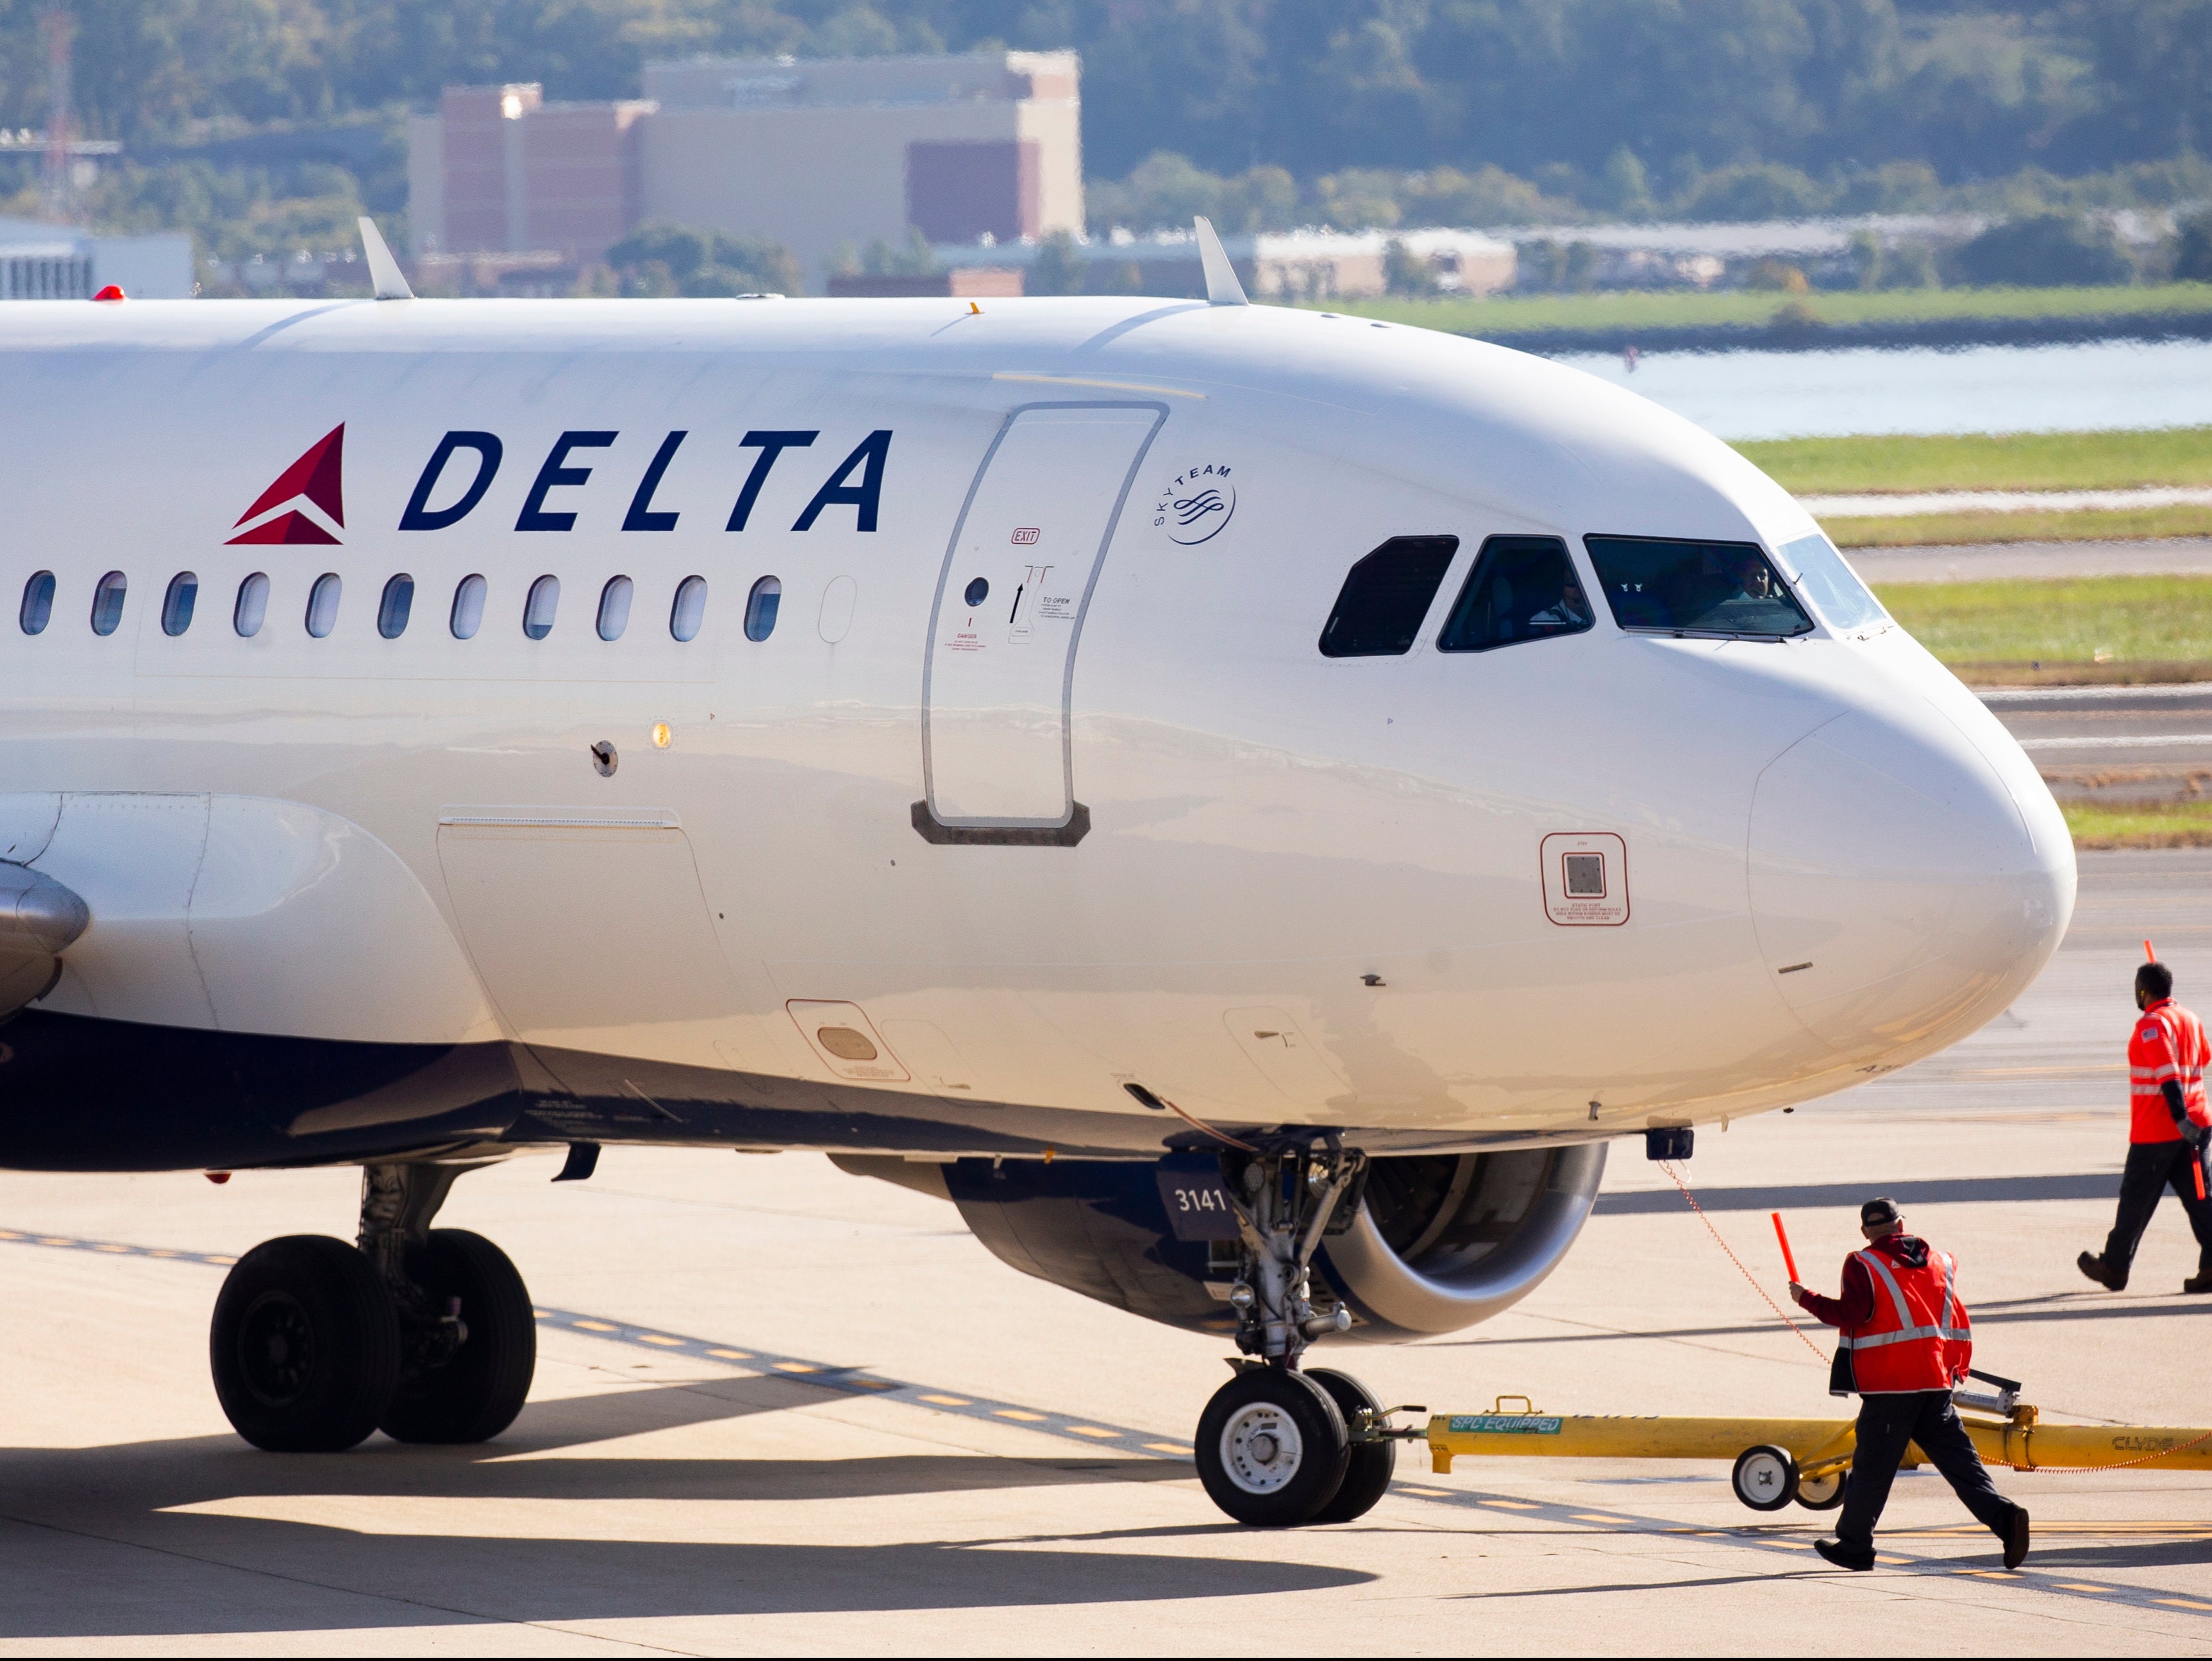 A Delta plane taxis on the tarmac